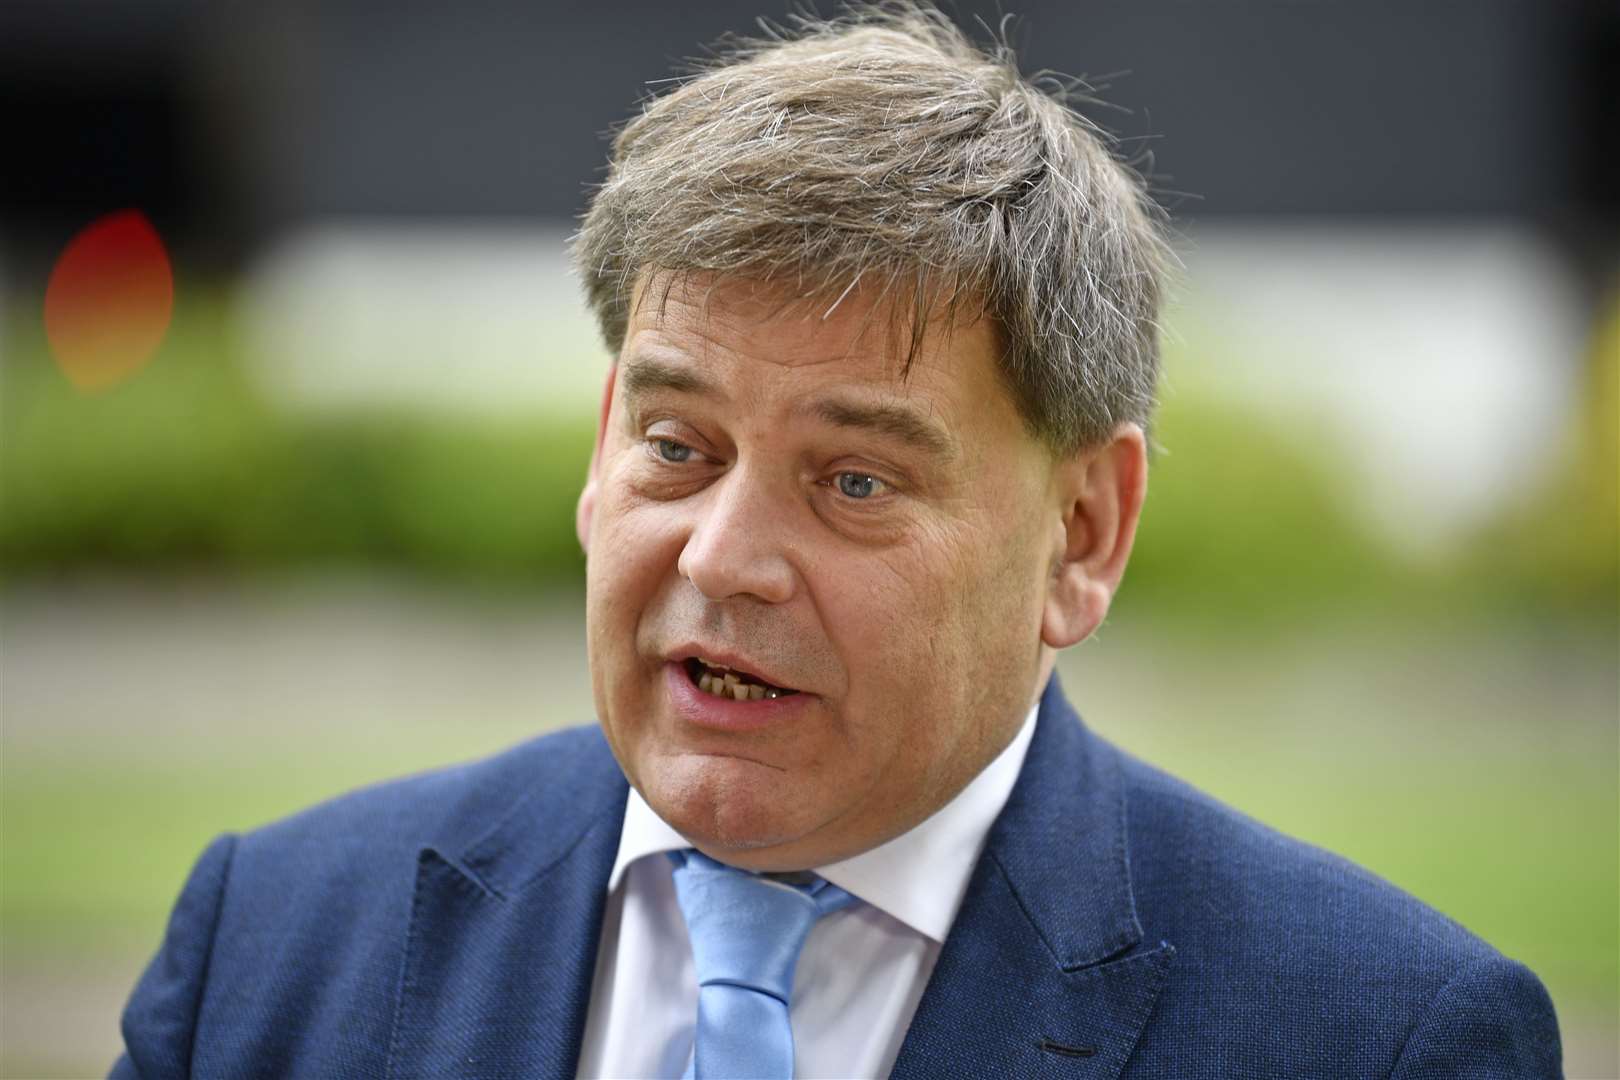 Independent MP Andrew Bridgen said 20,000 premature deaths in 2023 had been ‘airbrushed’ away by officials (Beresford Hodge/PA)